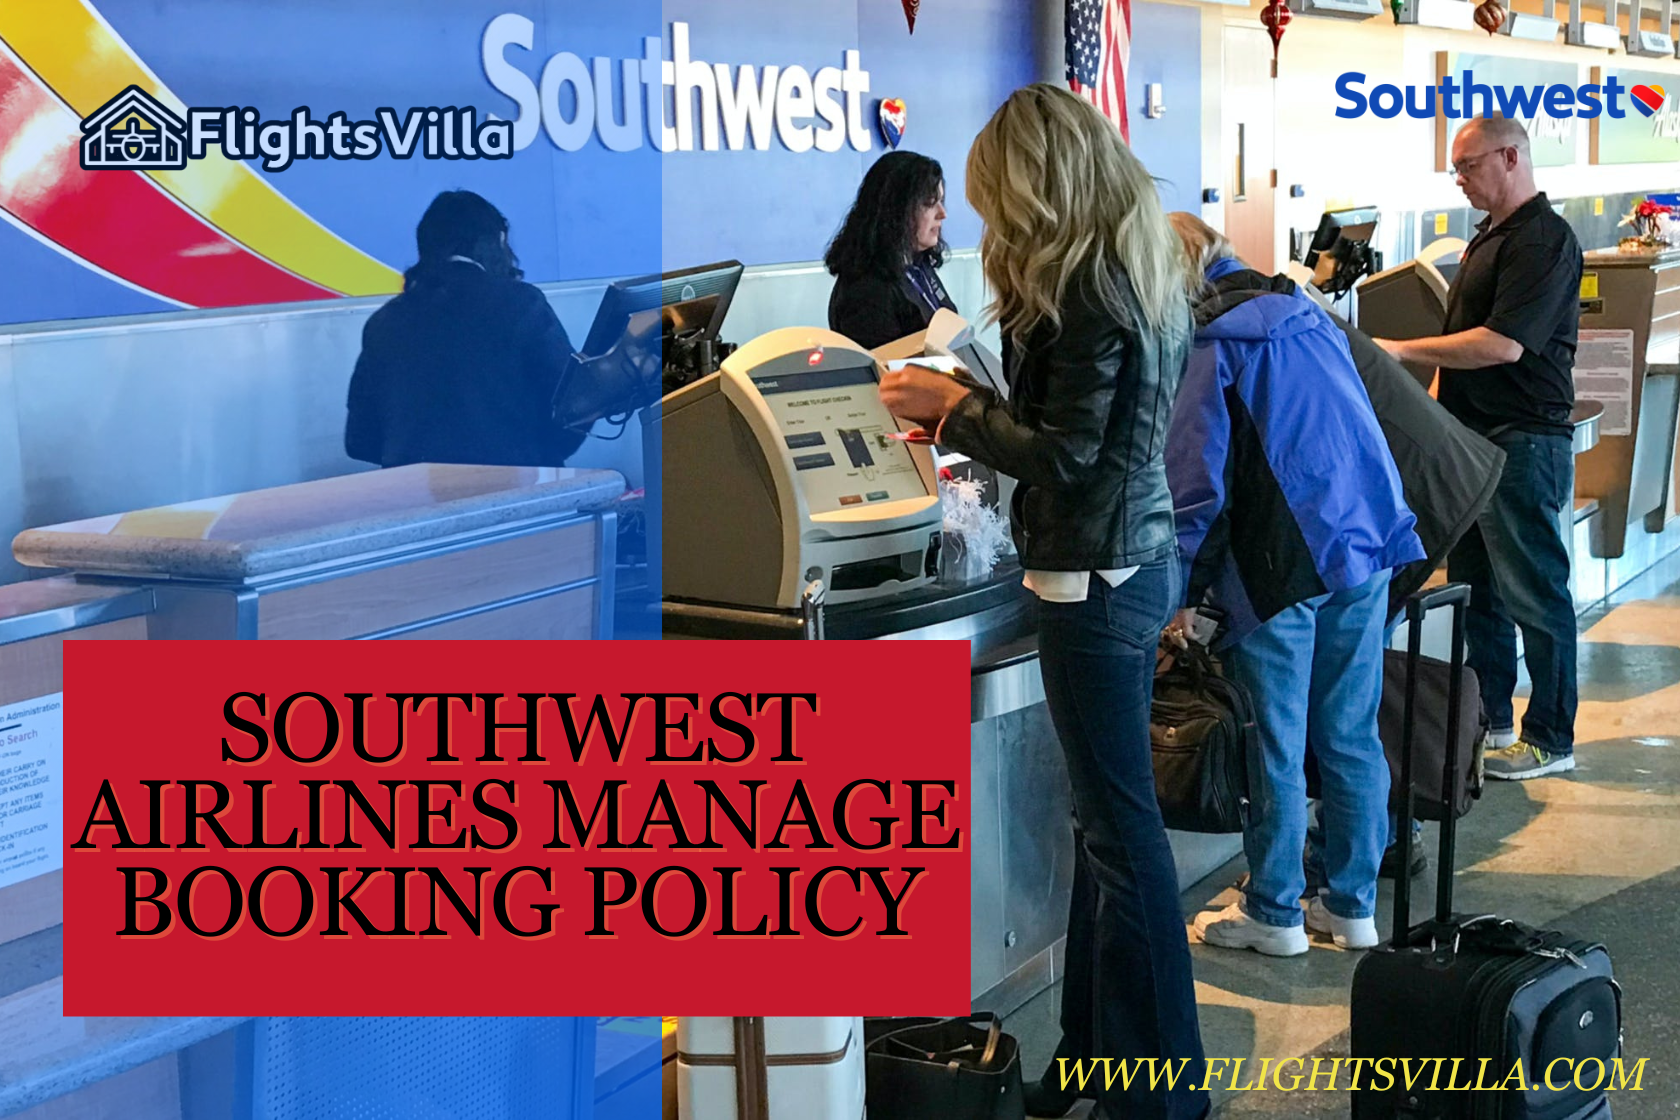 How Do I Manage My Booking at Southwest Airlines